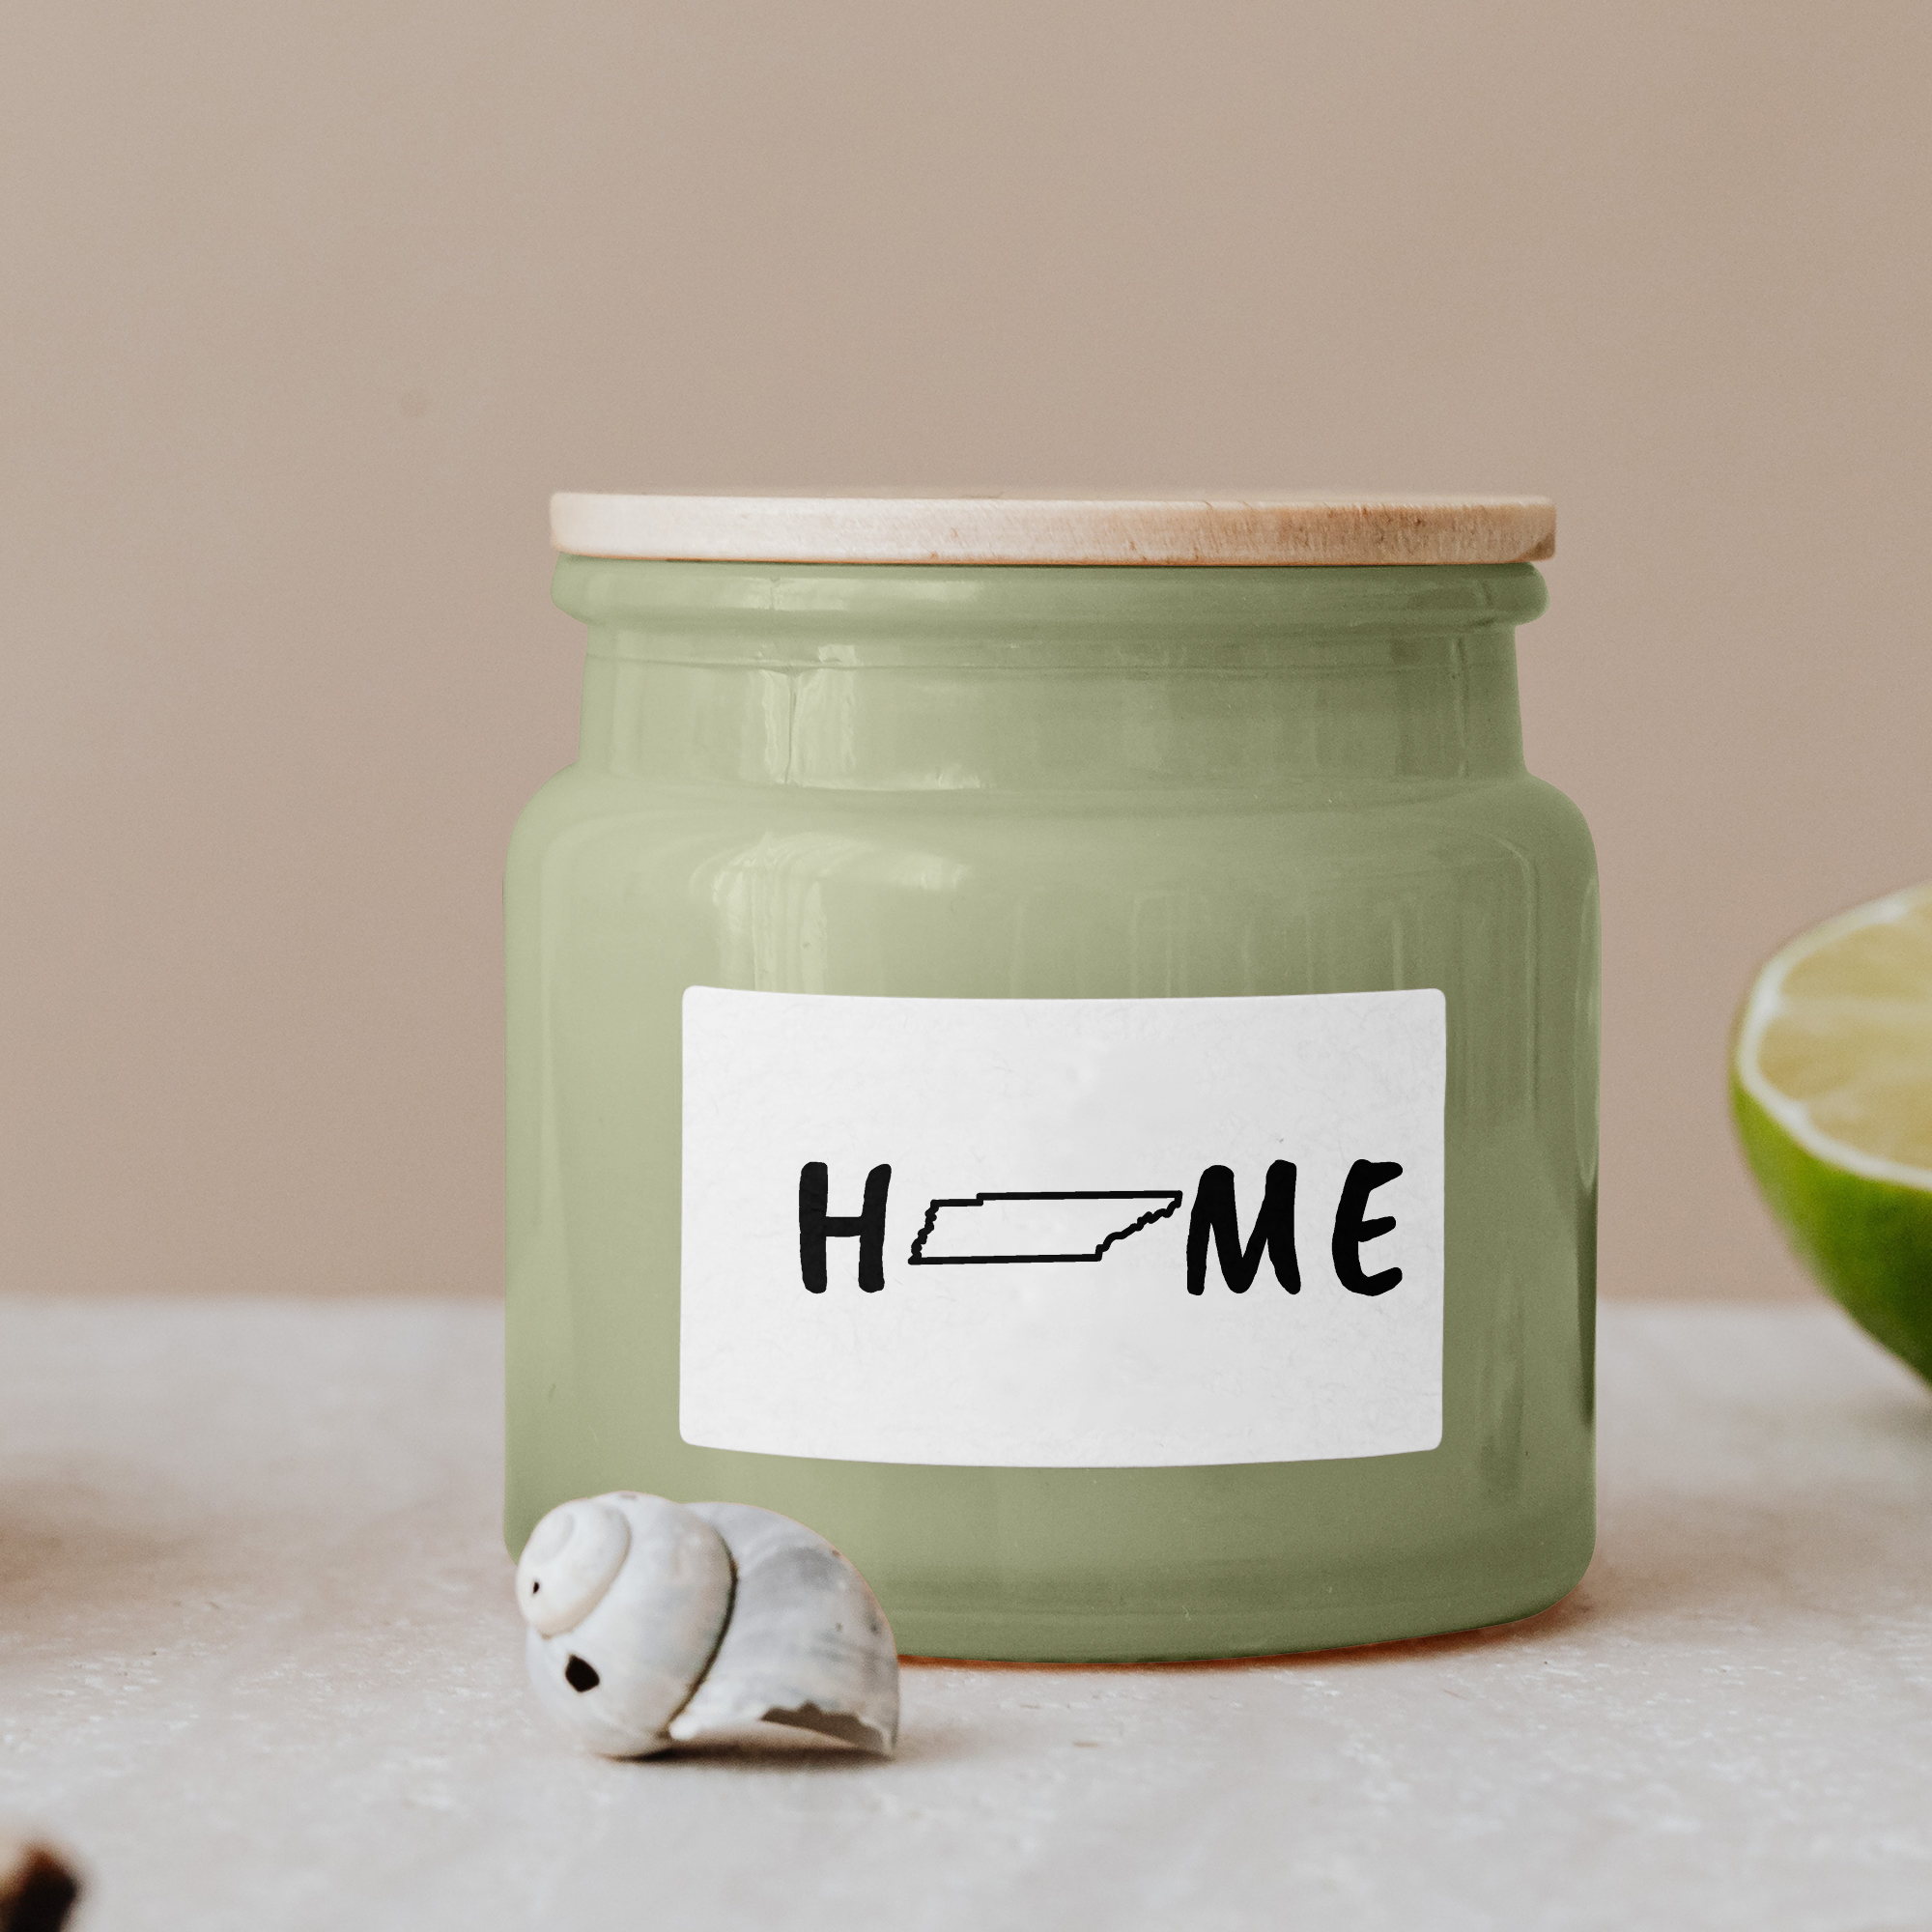 Black lettering "Home" on a white label on a green glass jar with wooden lid.